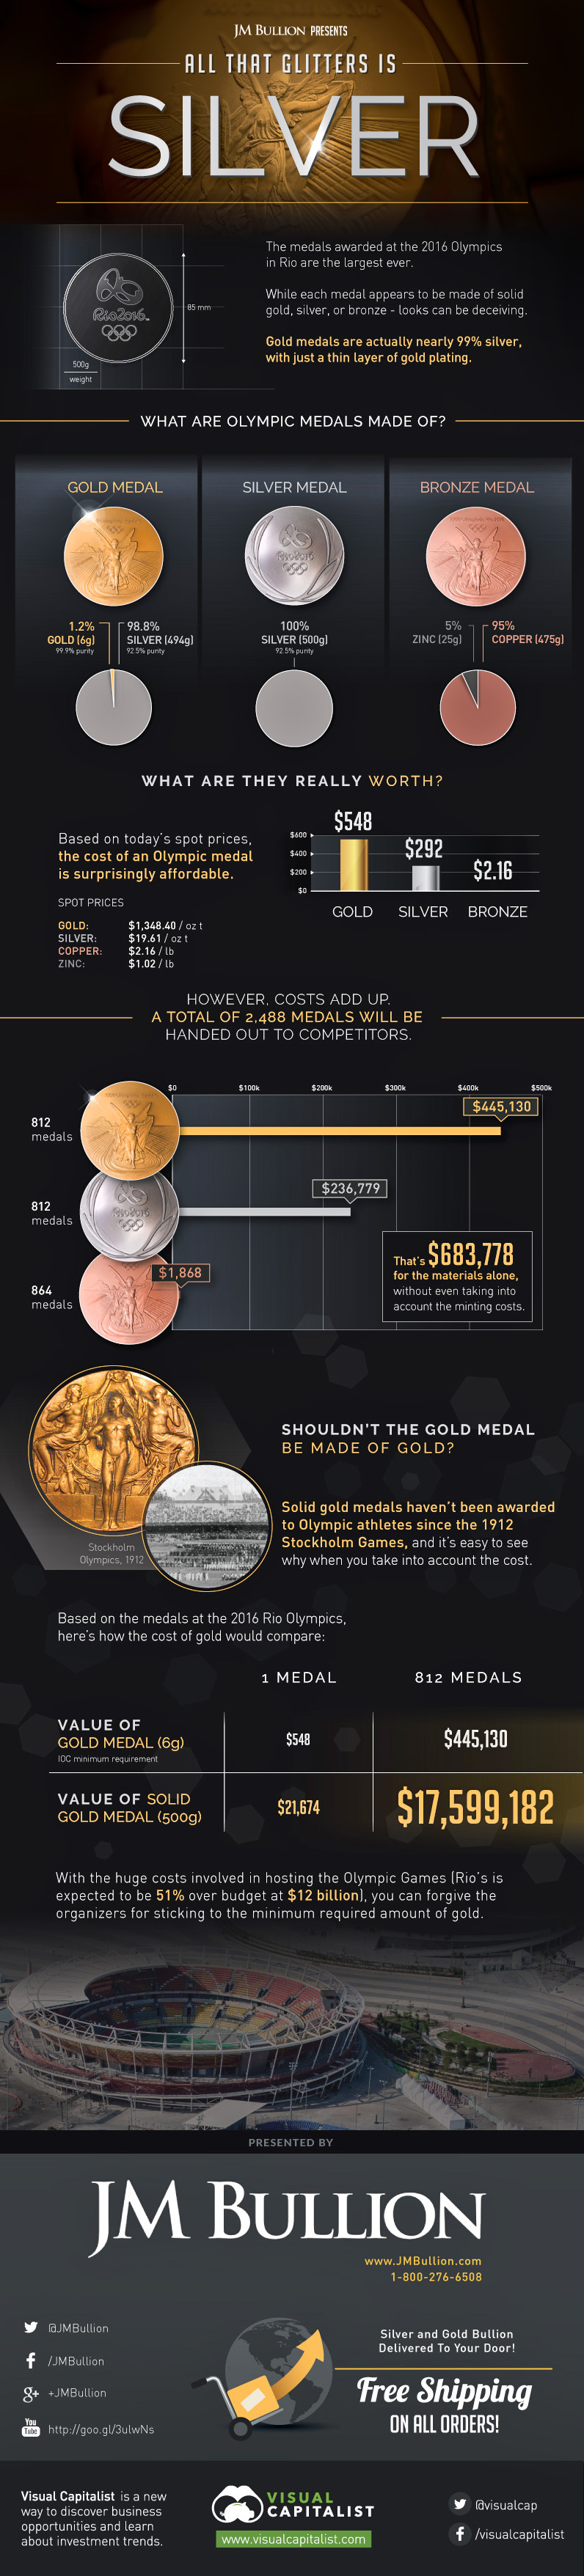 Olympic Gold Medals Have Almost Zero Gold in Them